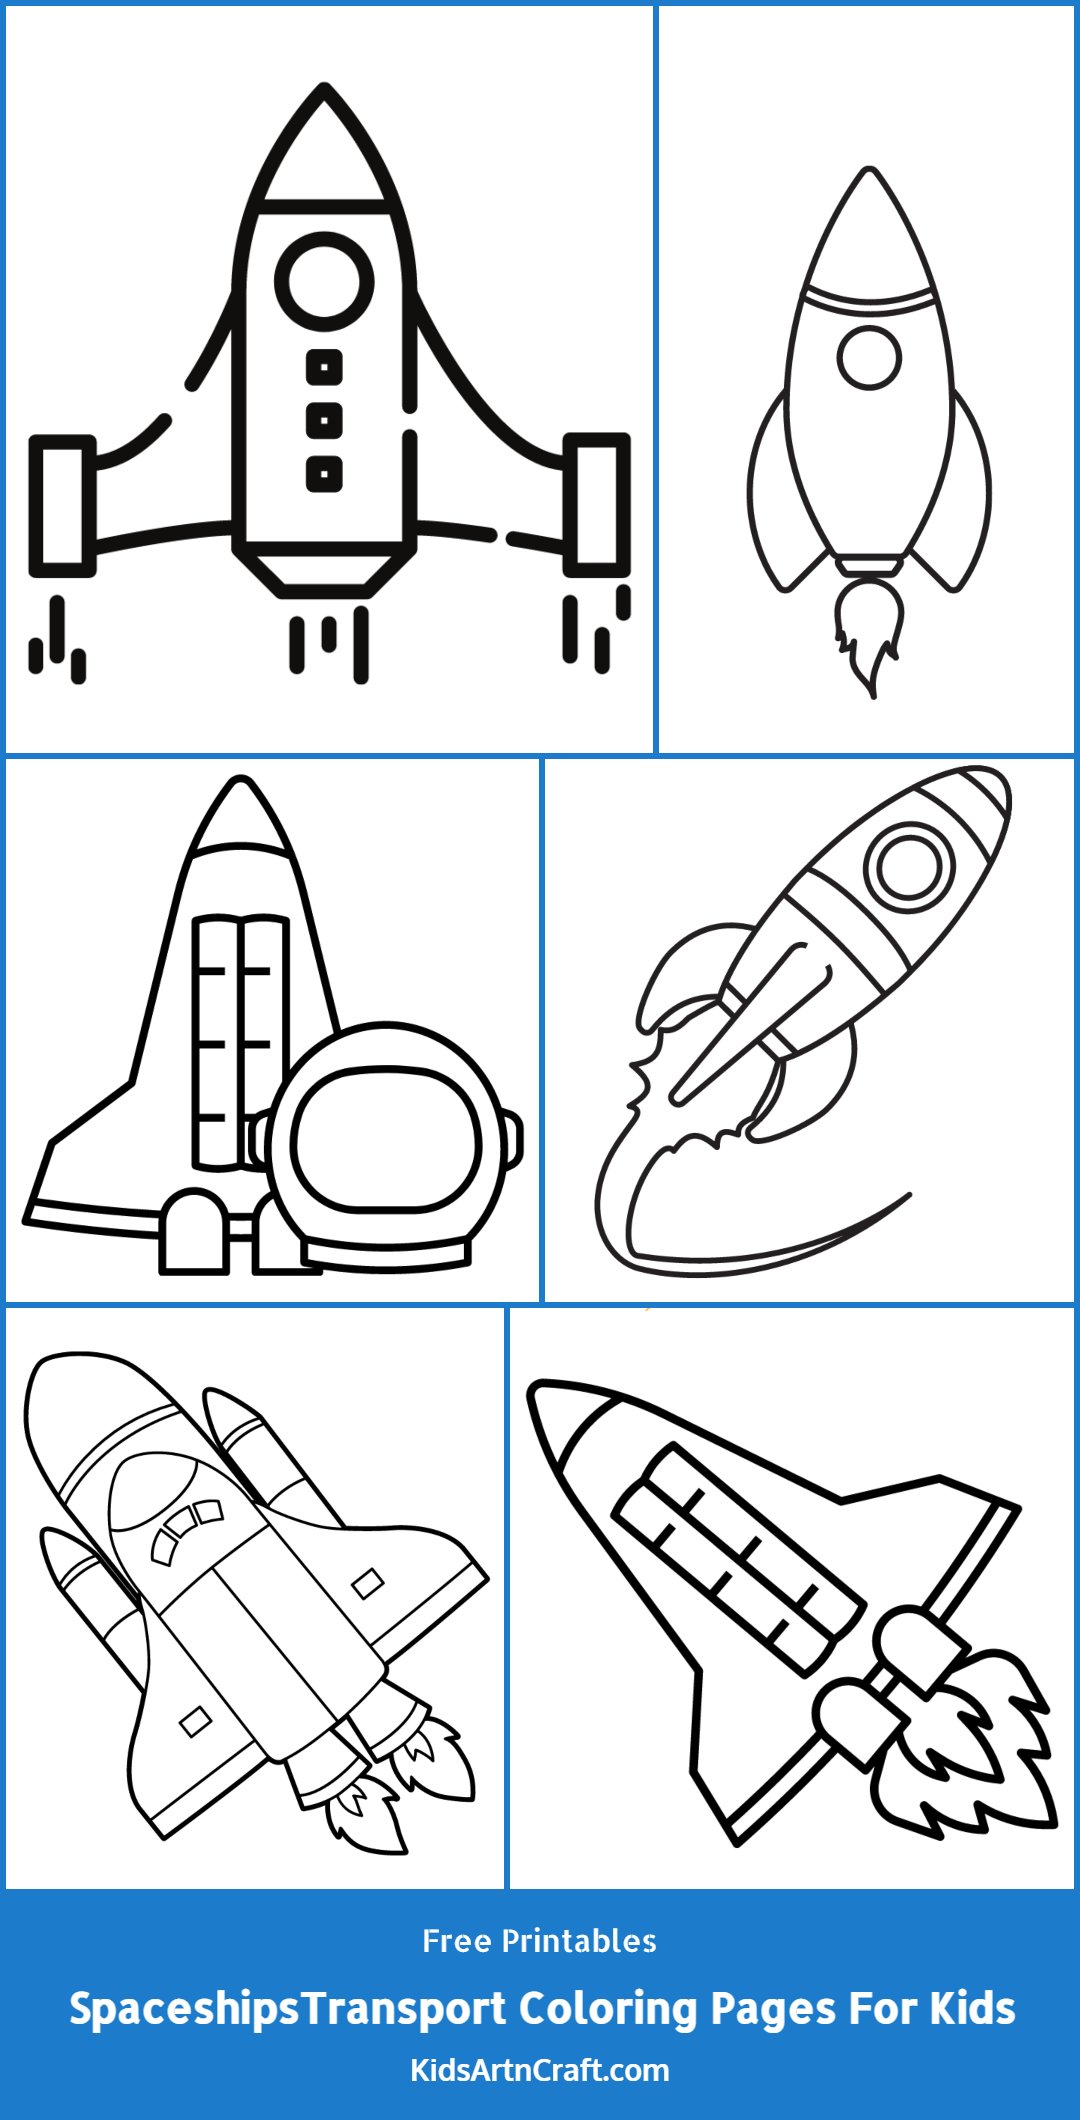 SpaceshipsTransport Coloring Pages For Kids – Free Printables